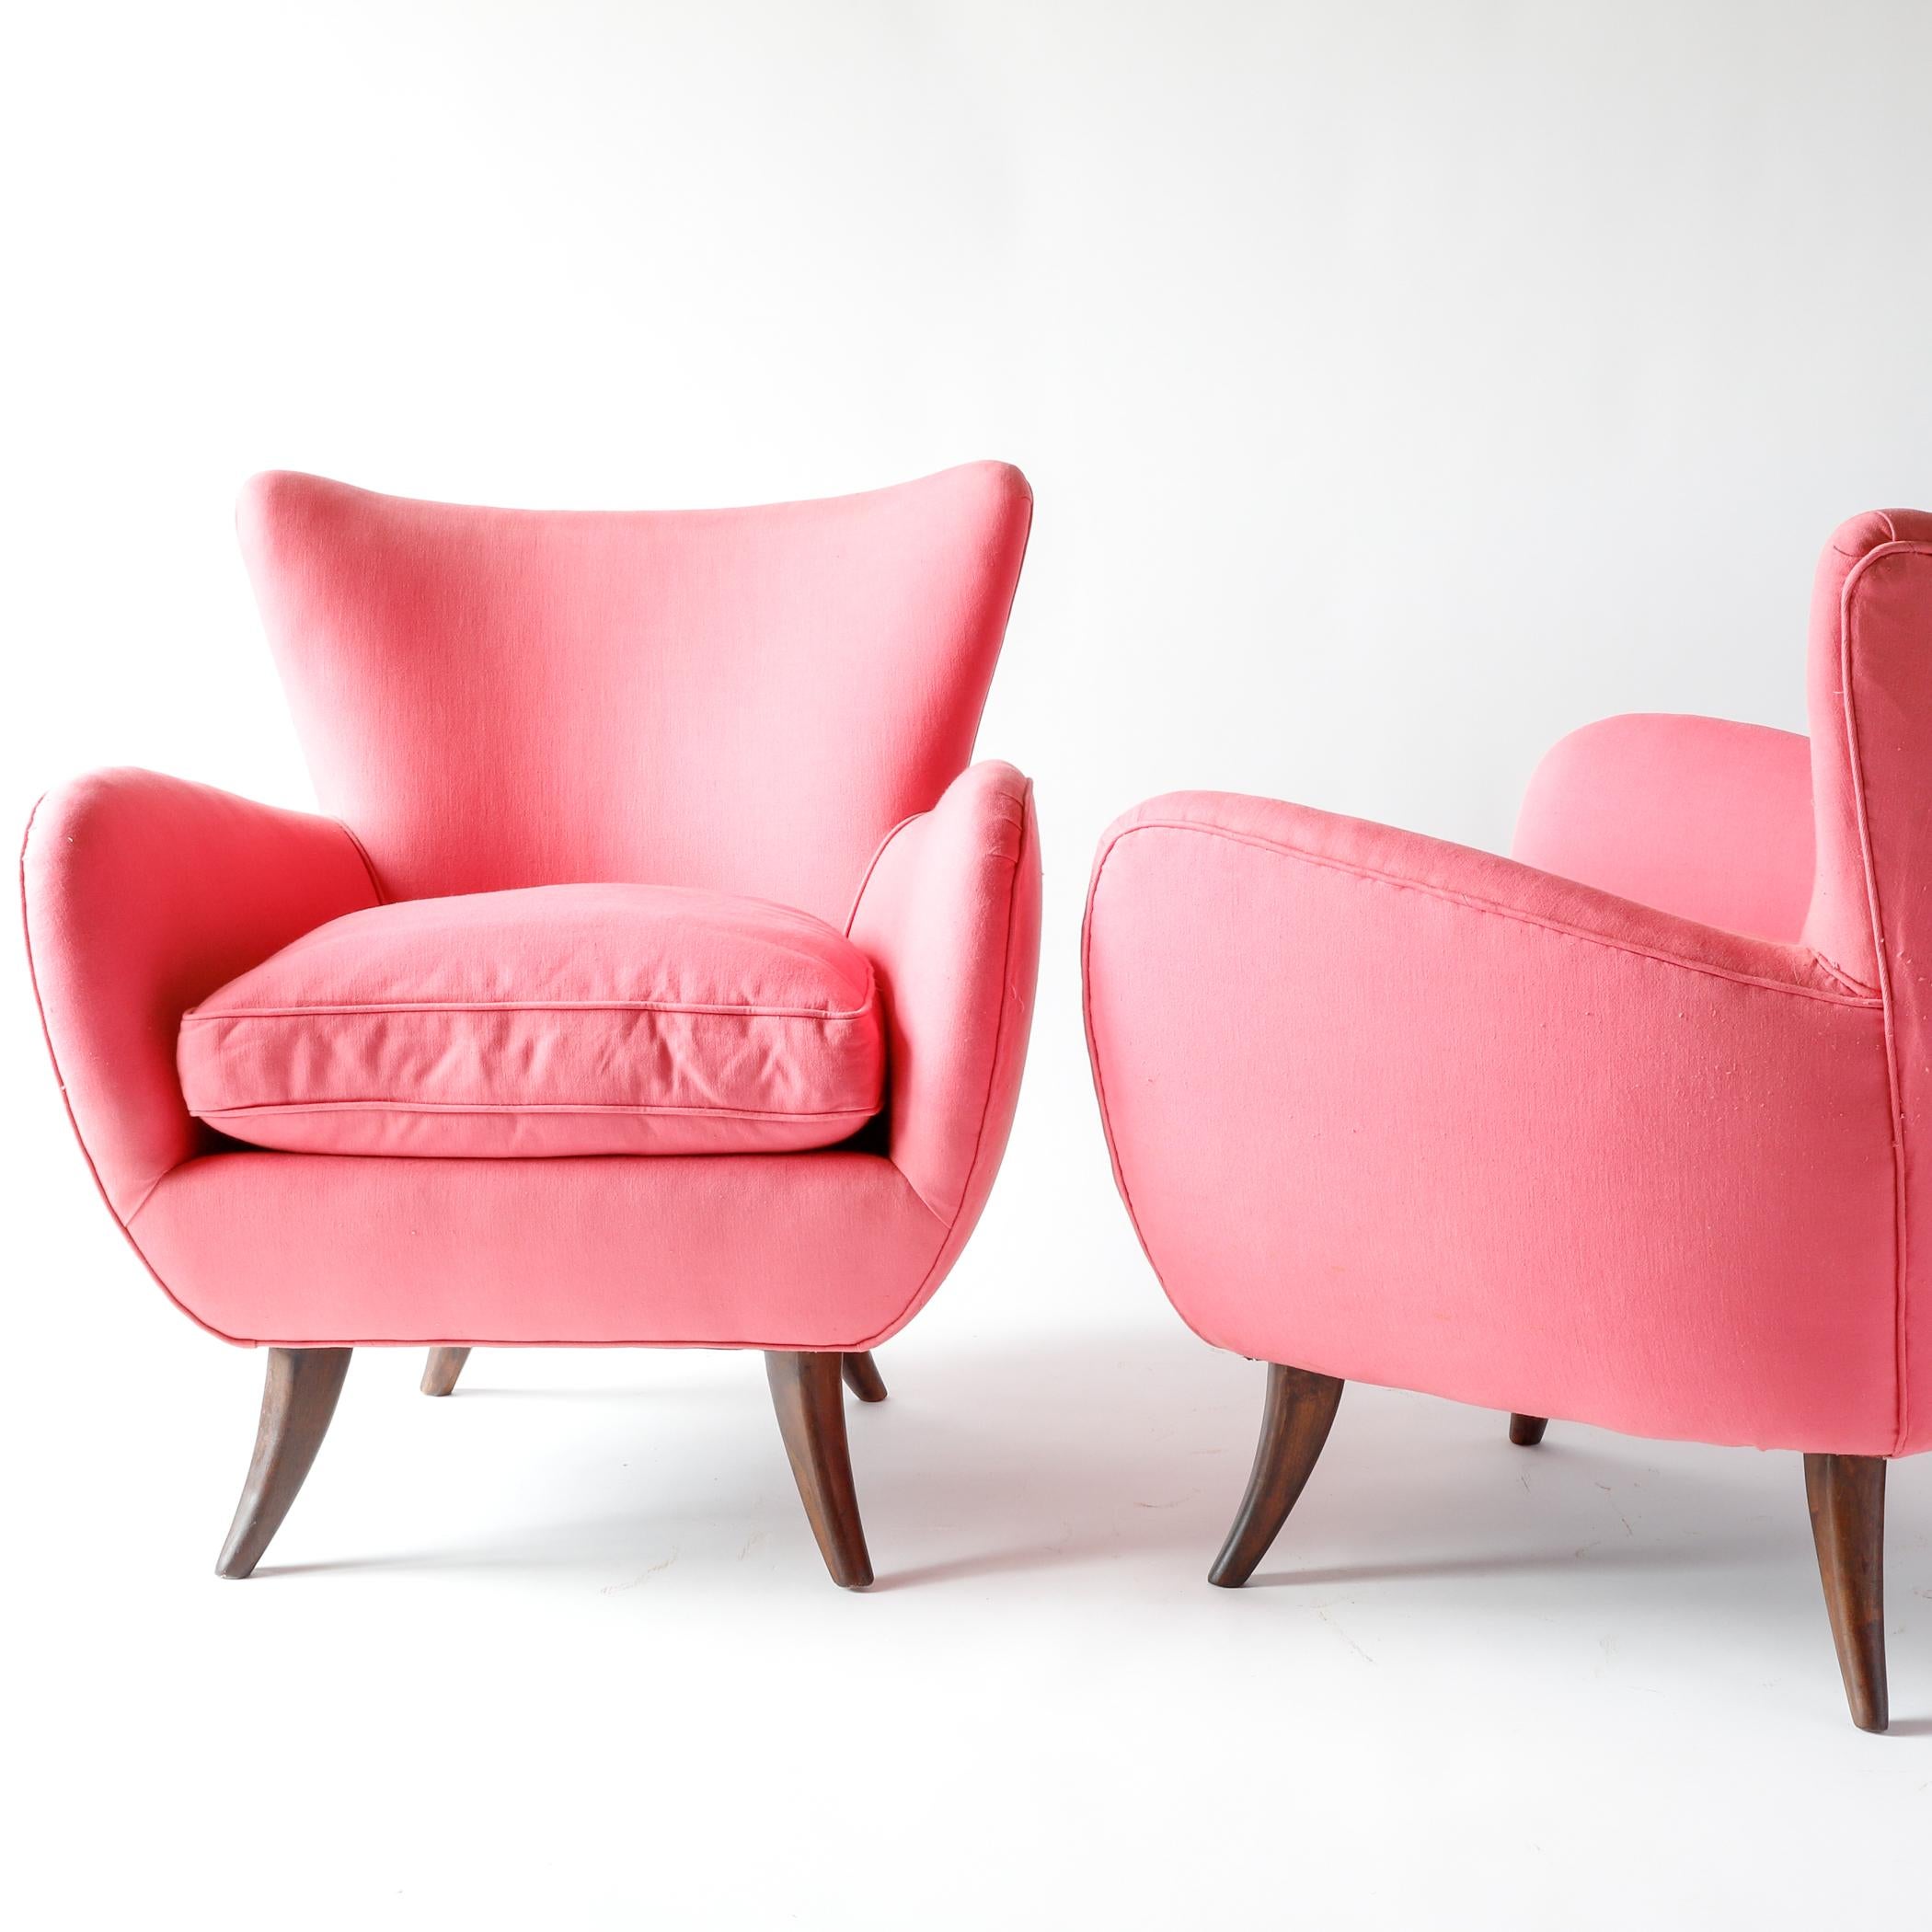 Mid-20th Century Pair of Ernst Schwadron Upholstered Lounge Chairs, 1940s, Bright Pink For Sale